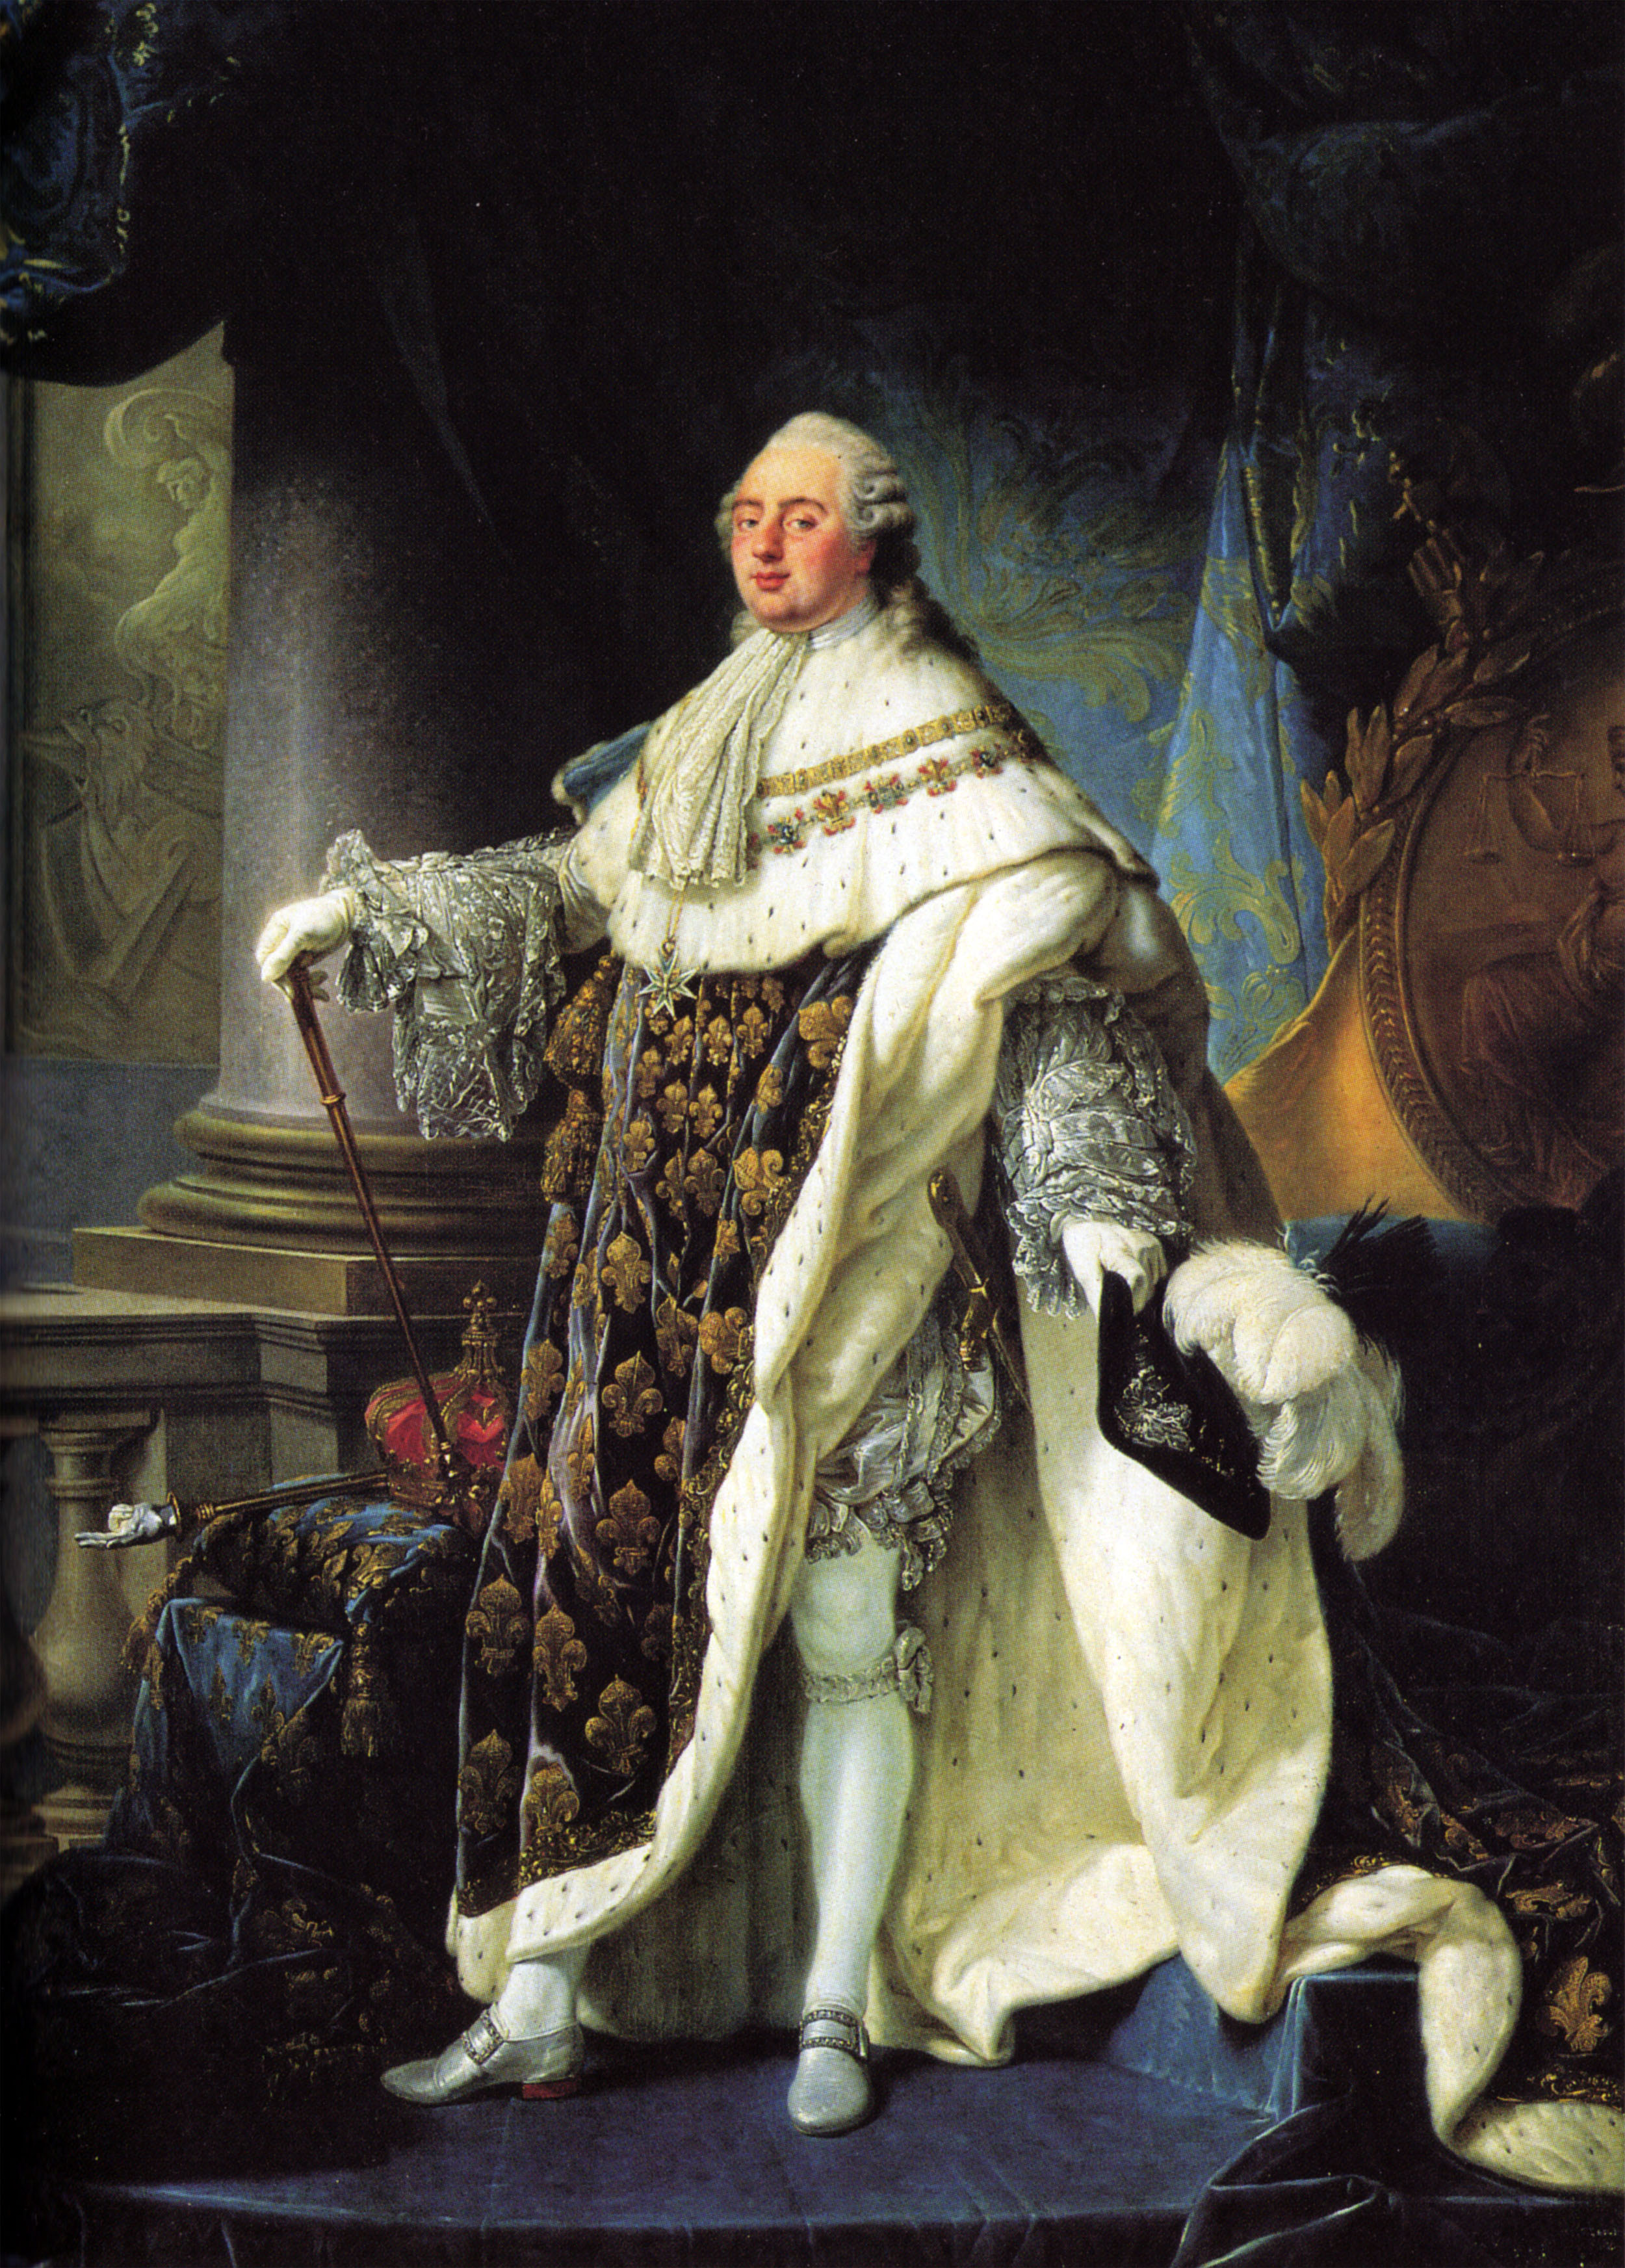 The French government faced a fiscal crisis in the 1780s, and King Louis XVI was criticized for his handling of these affairs.